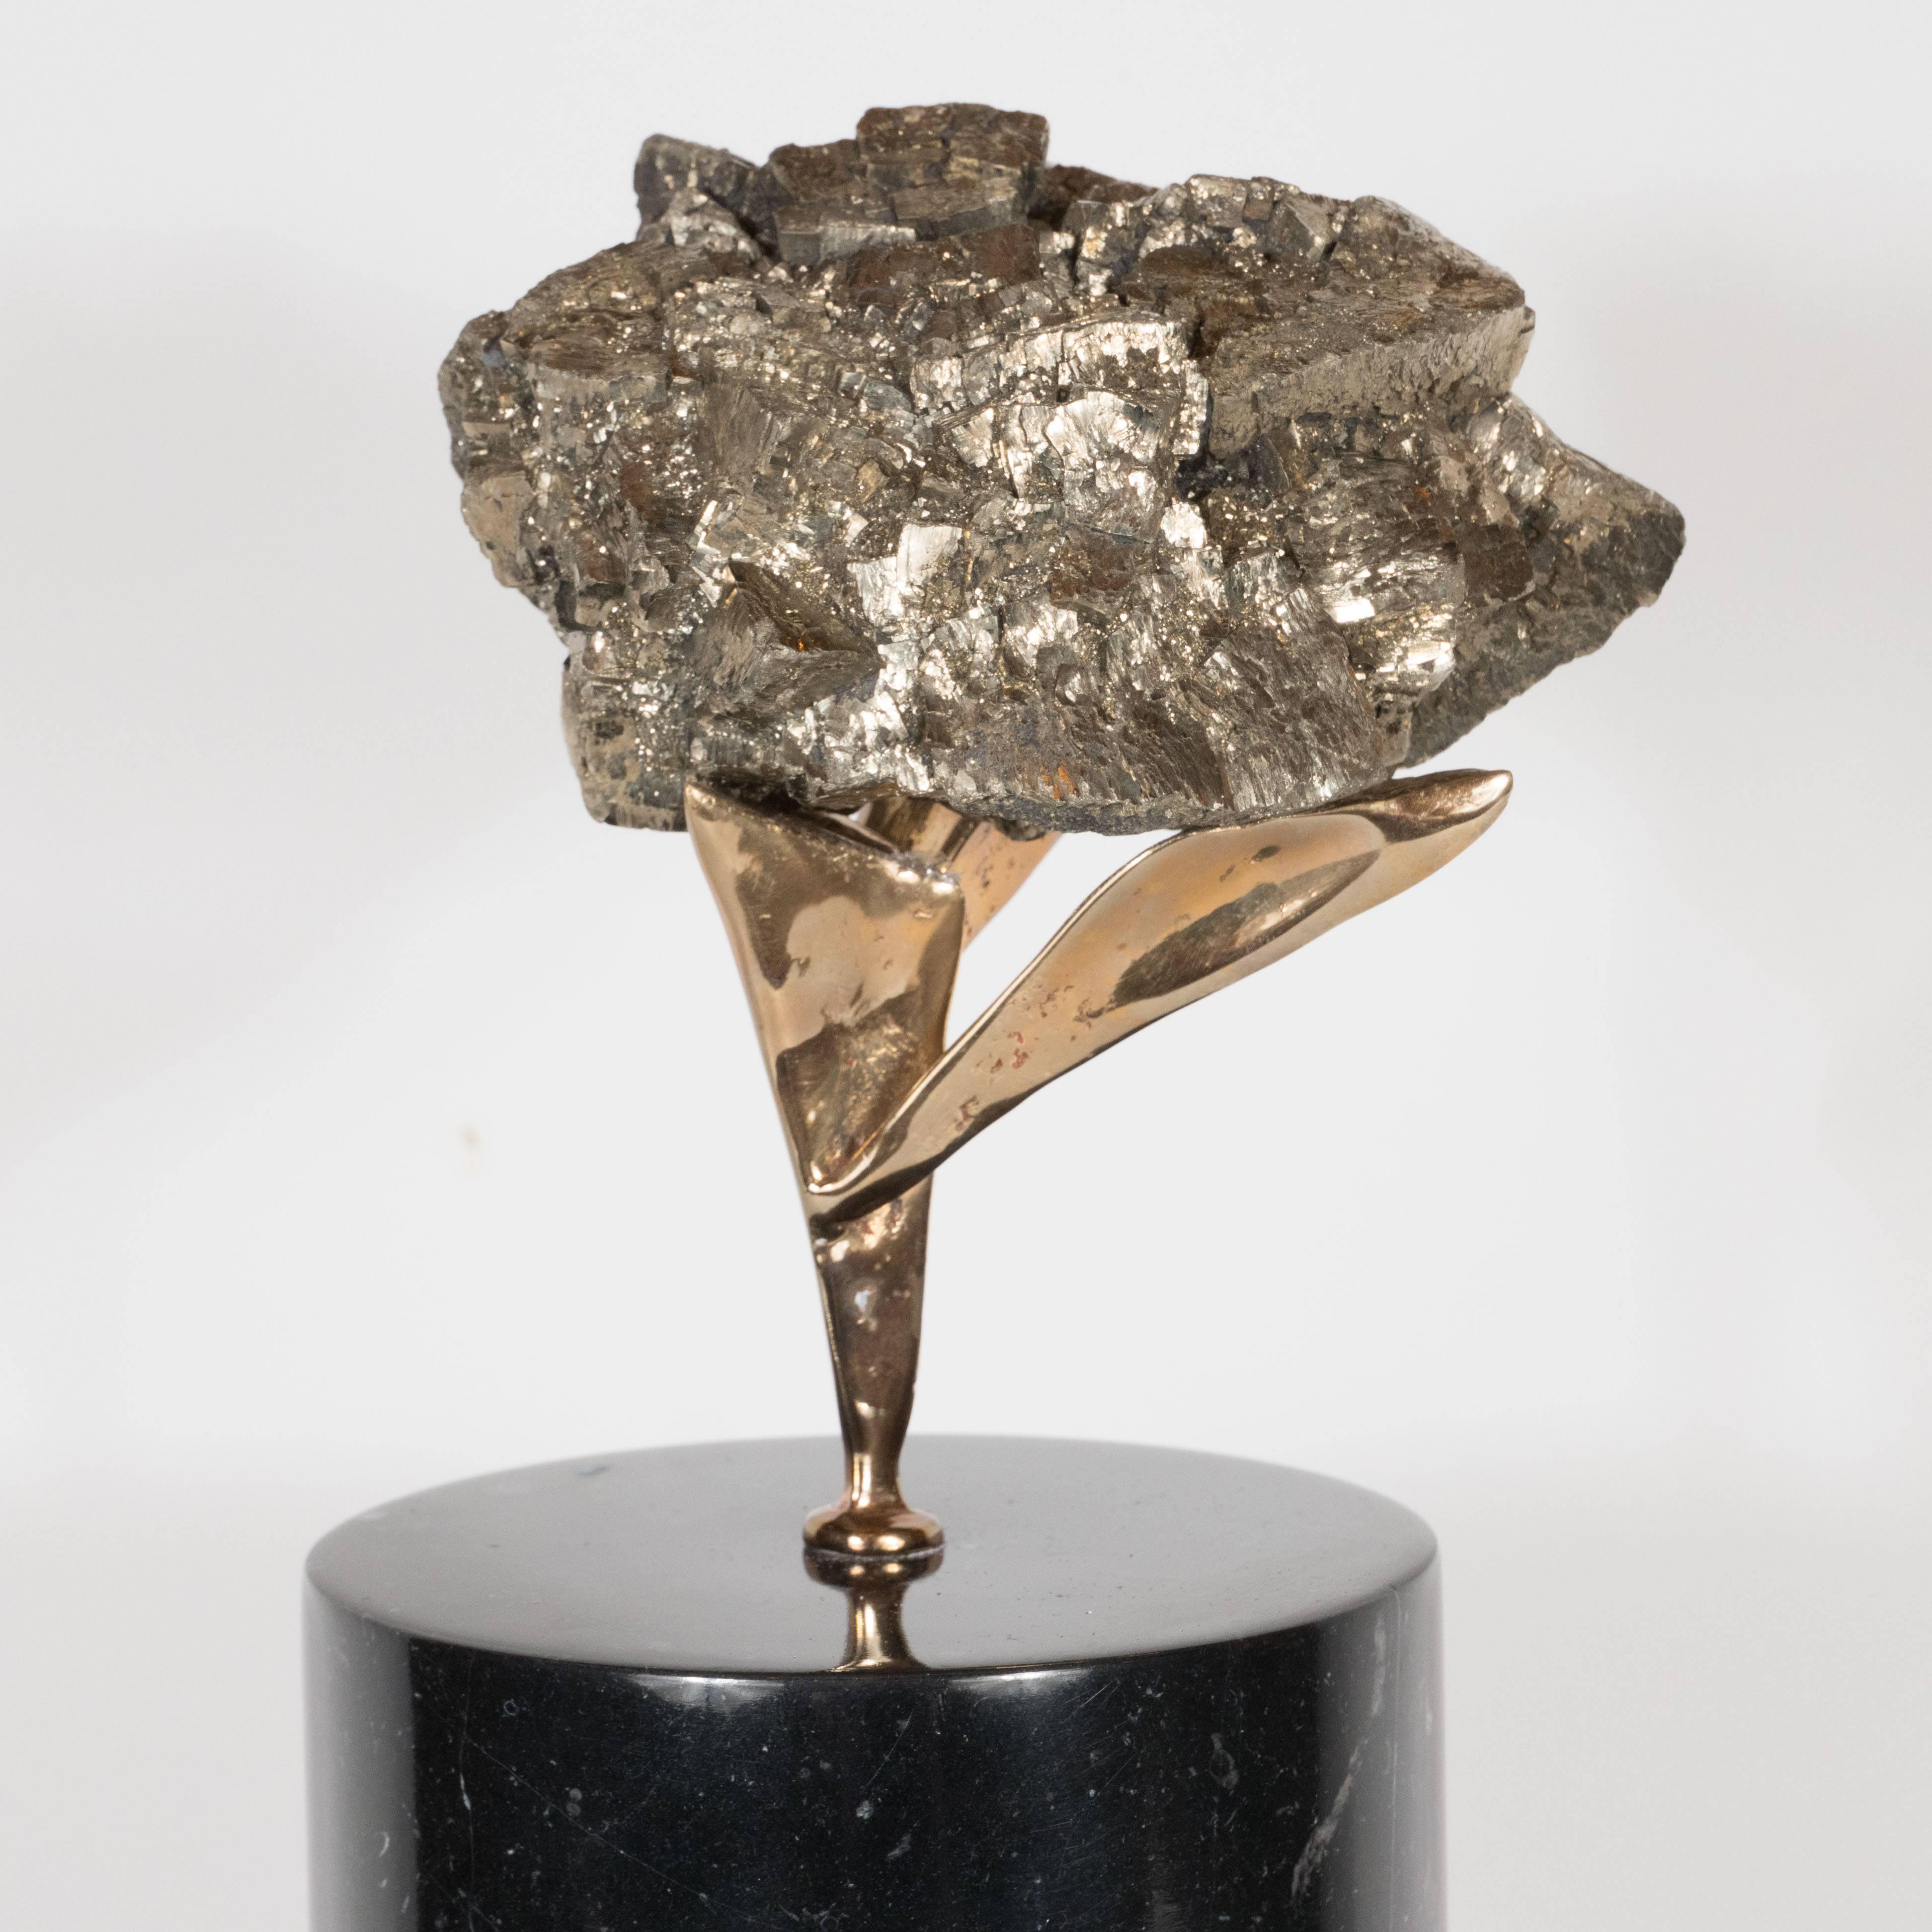 Contemporary Pyrite Specimen in a Sculptural Bronze Cradle Attached to a Black Marble Base